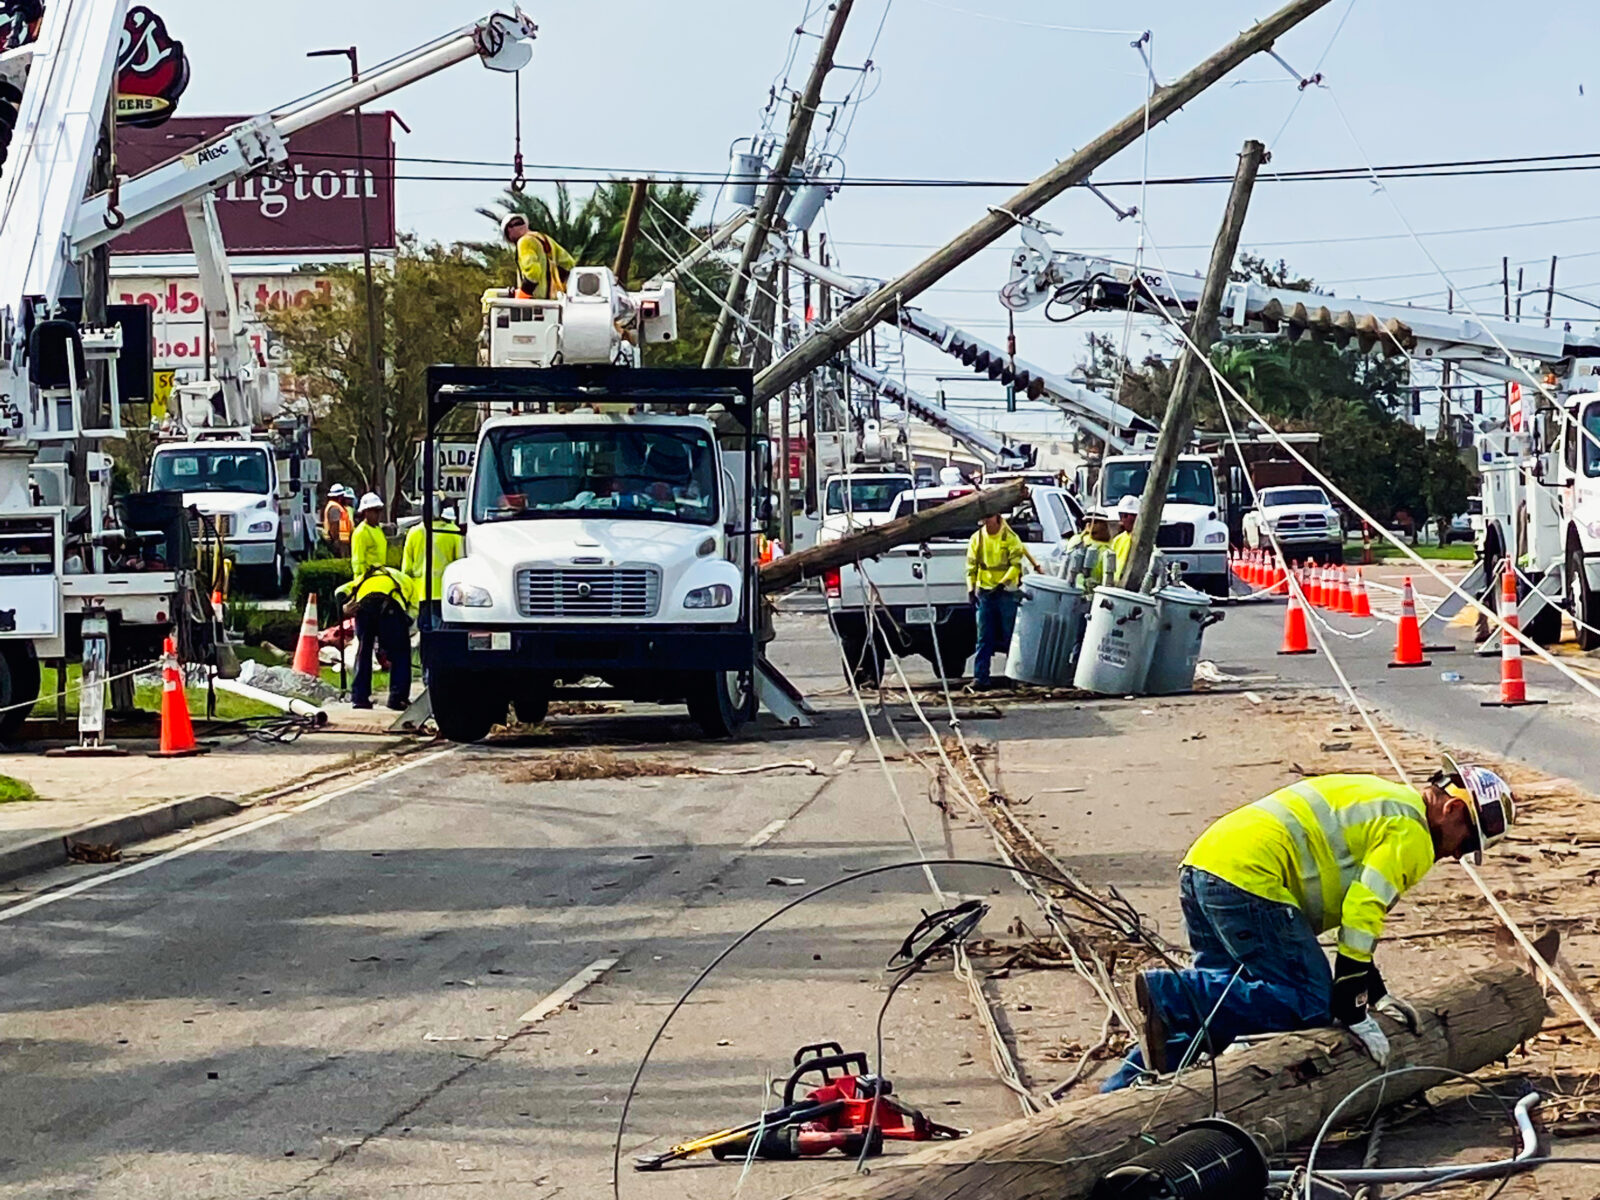 Restoration workers removing debris from damaged power lines on the road